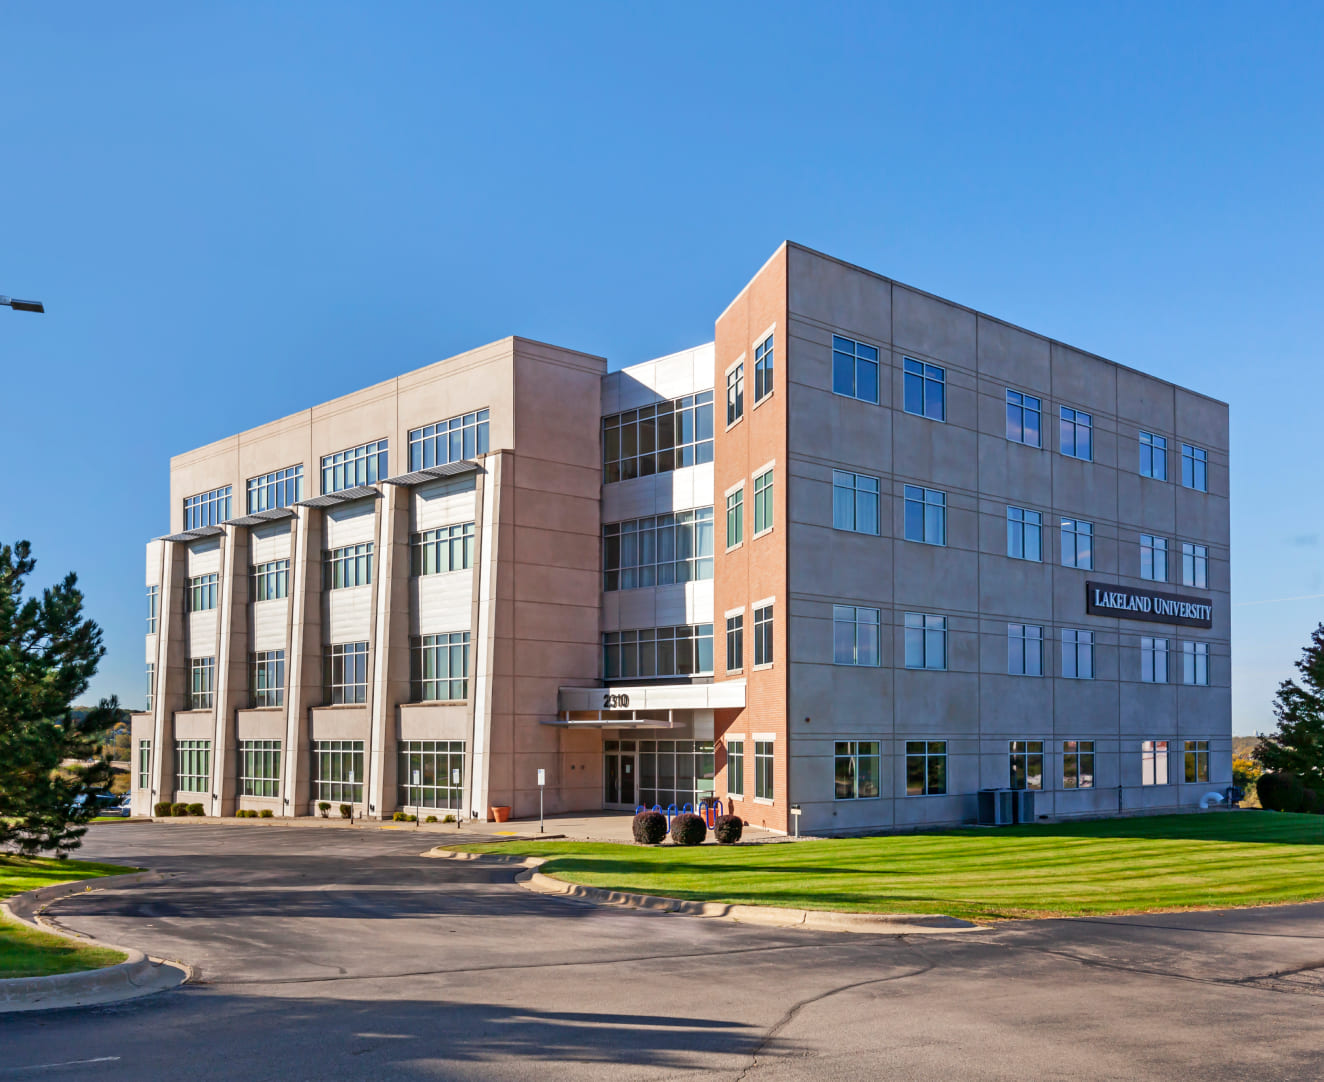 The full front entrance and parking lot of the office building at 2310 Crossroads Drive in Madison, WI.